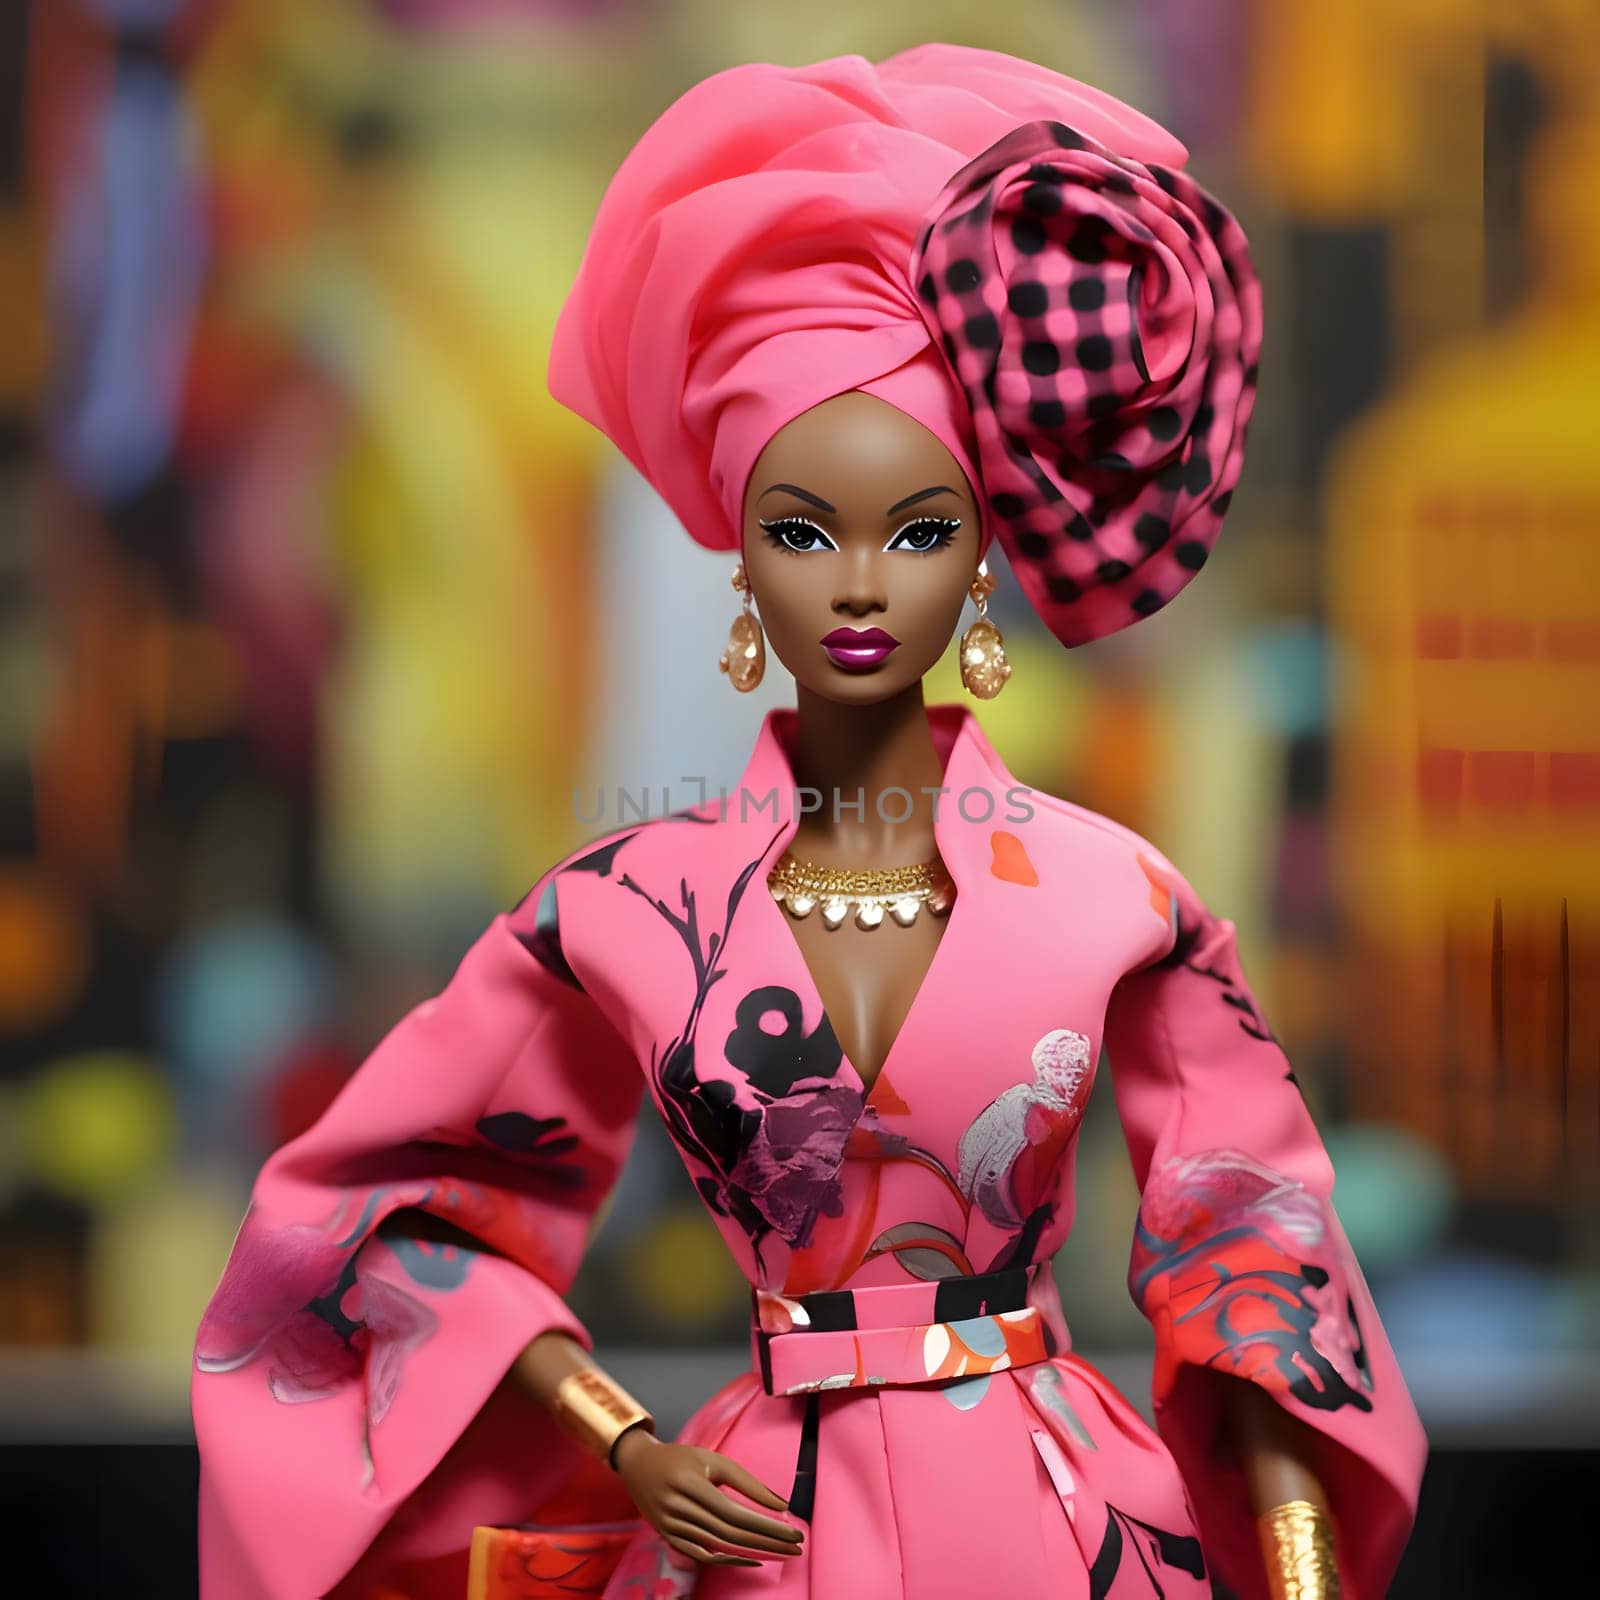 Barbie, with her stunning black complexion, looks charming in her pink outfit against the blurred background, exuding elegance and style.